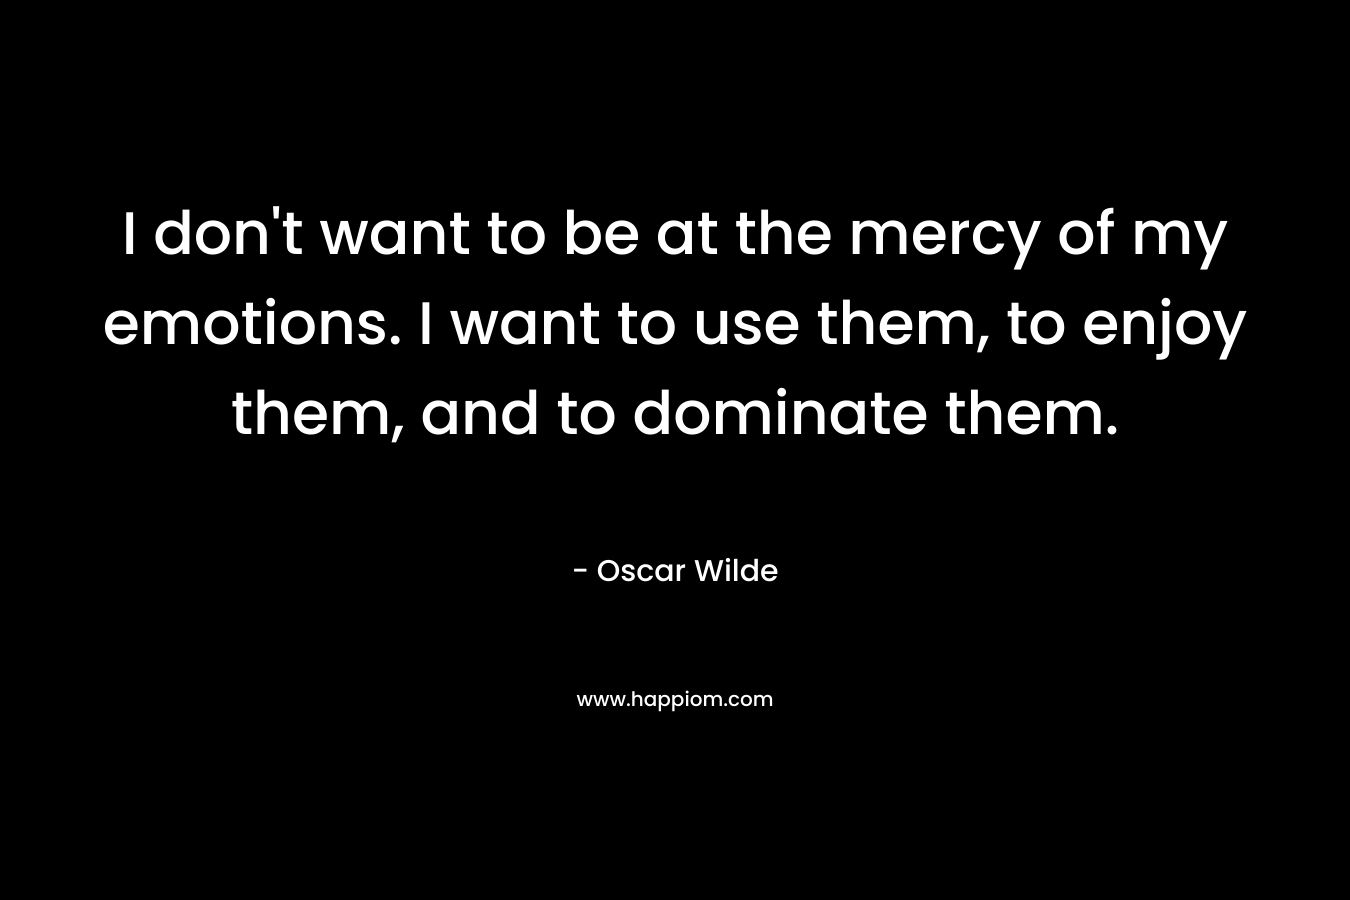 I don’t want to be at the mercy of my emotions. I want to use them, to enjoy them, and to dominate them. – Oscar Wilde